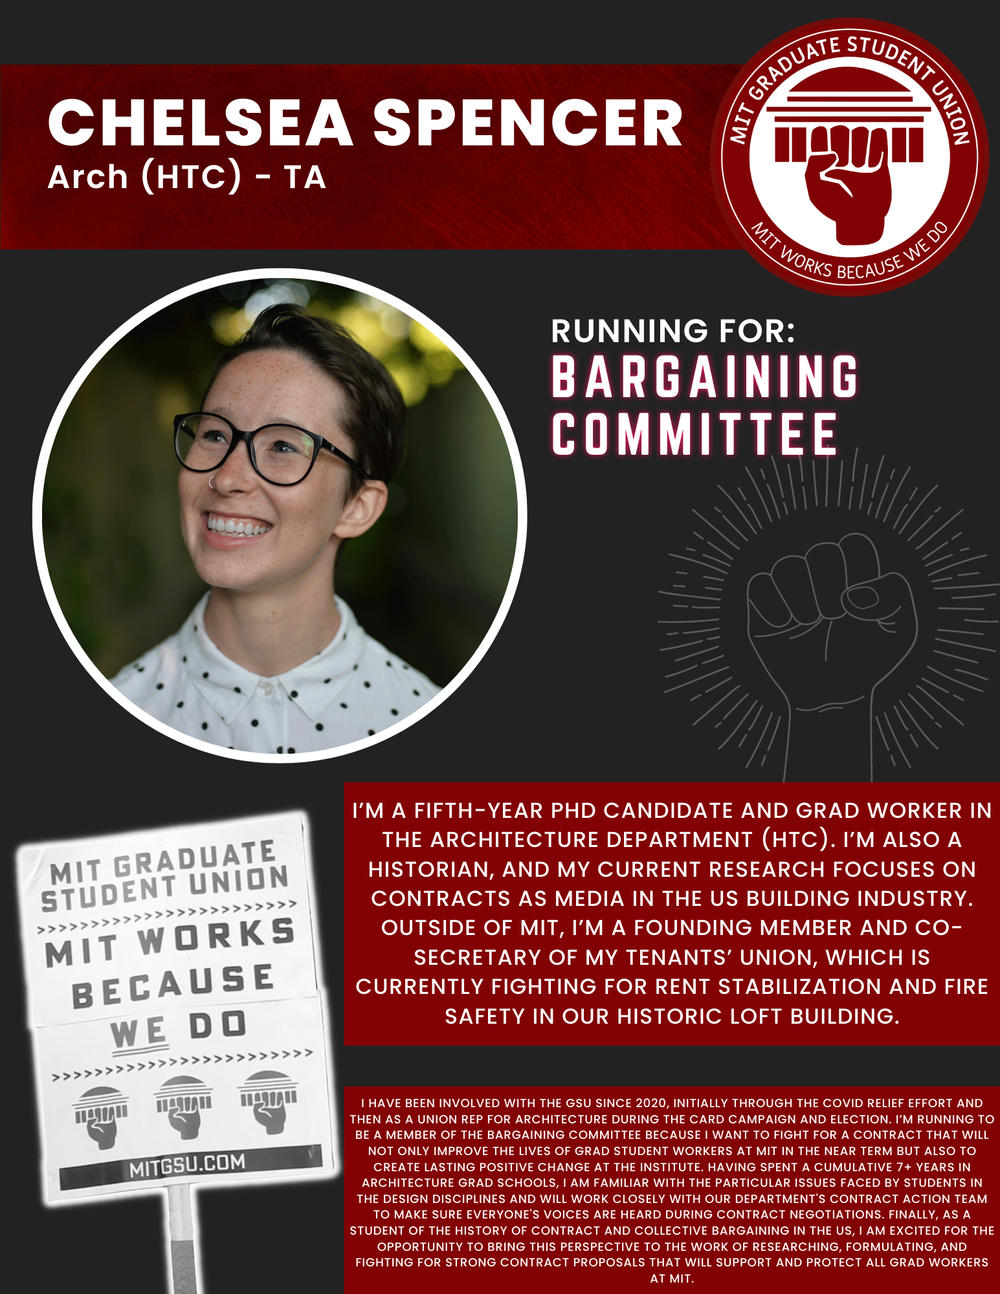  CHELSEA SPENCER Arch (HTC) - TA   RUNNING FOR: Bargaining Committee  I’M A FIFTH-YEAR PHD CANDIDATE AND GRAD WORKER IN THE ARCHITECTURE DEPARTMENT (HTC). I’M ALSO A HISTORIAN, AND MY CURRENT RESEARCH FOCUSES ON CONTRACTS AS MEDIA IN THE US BUILDING 